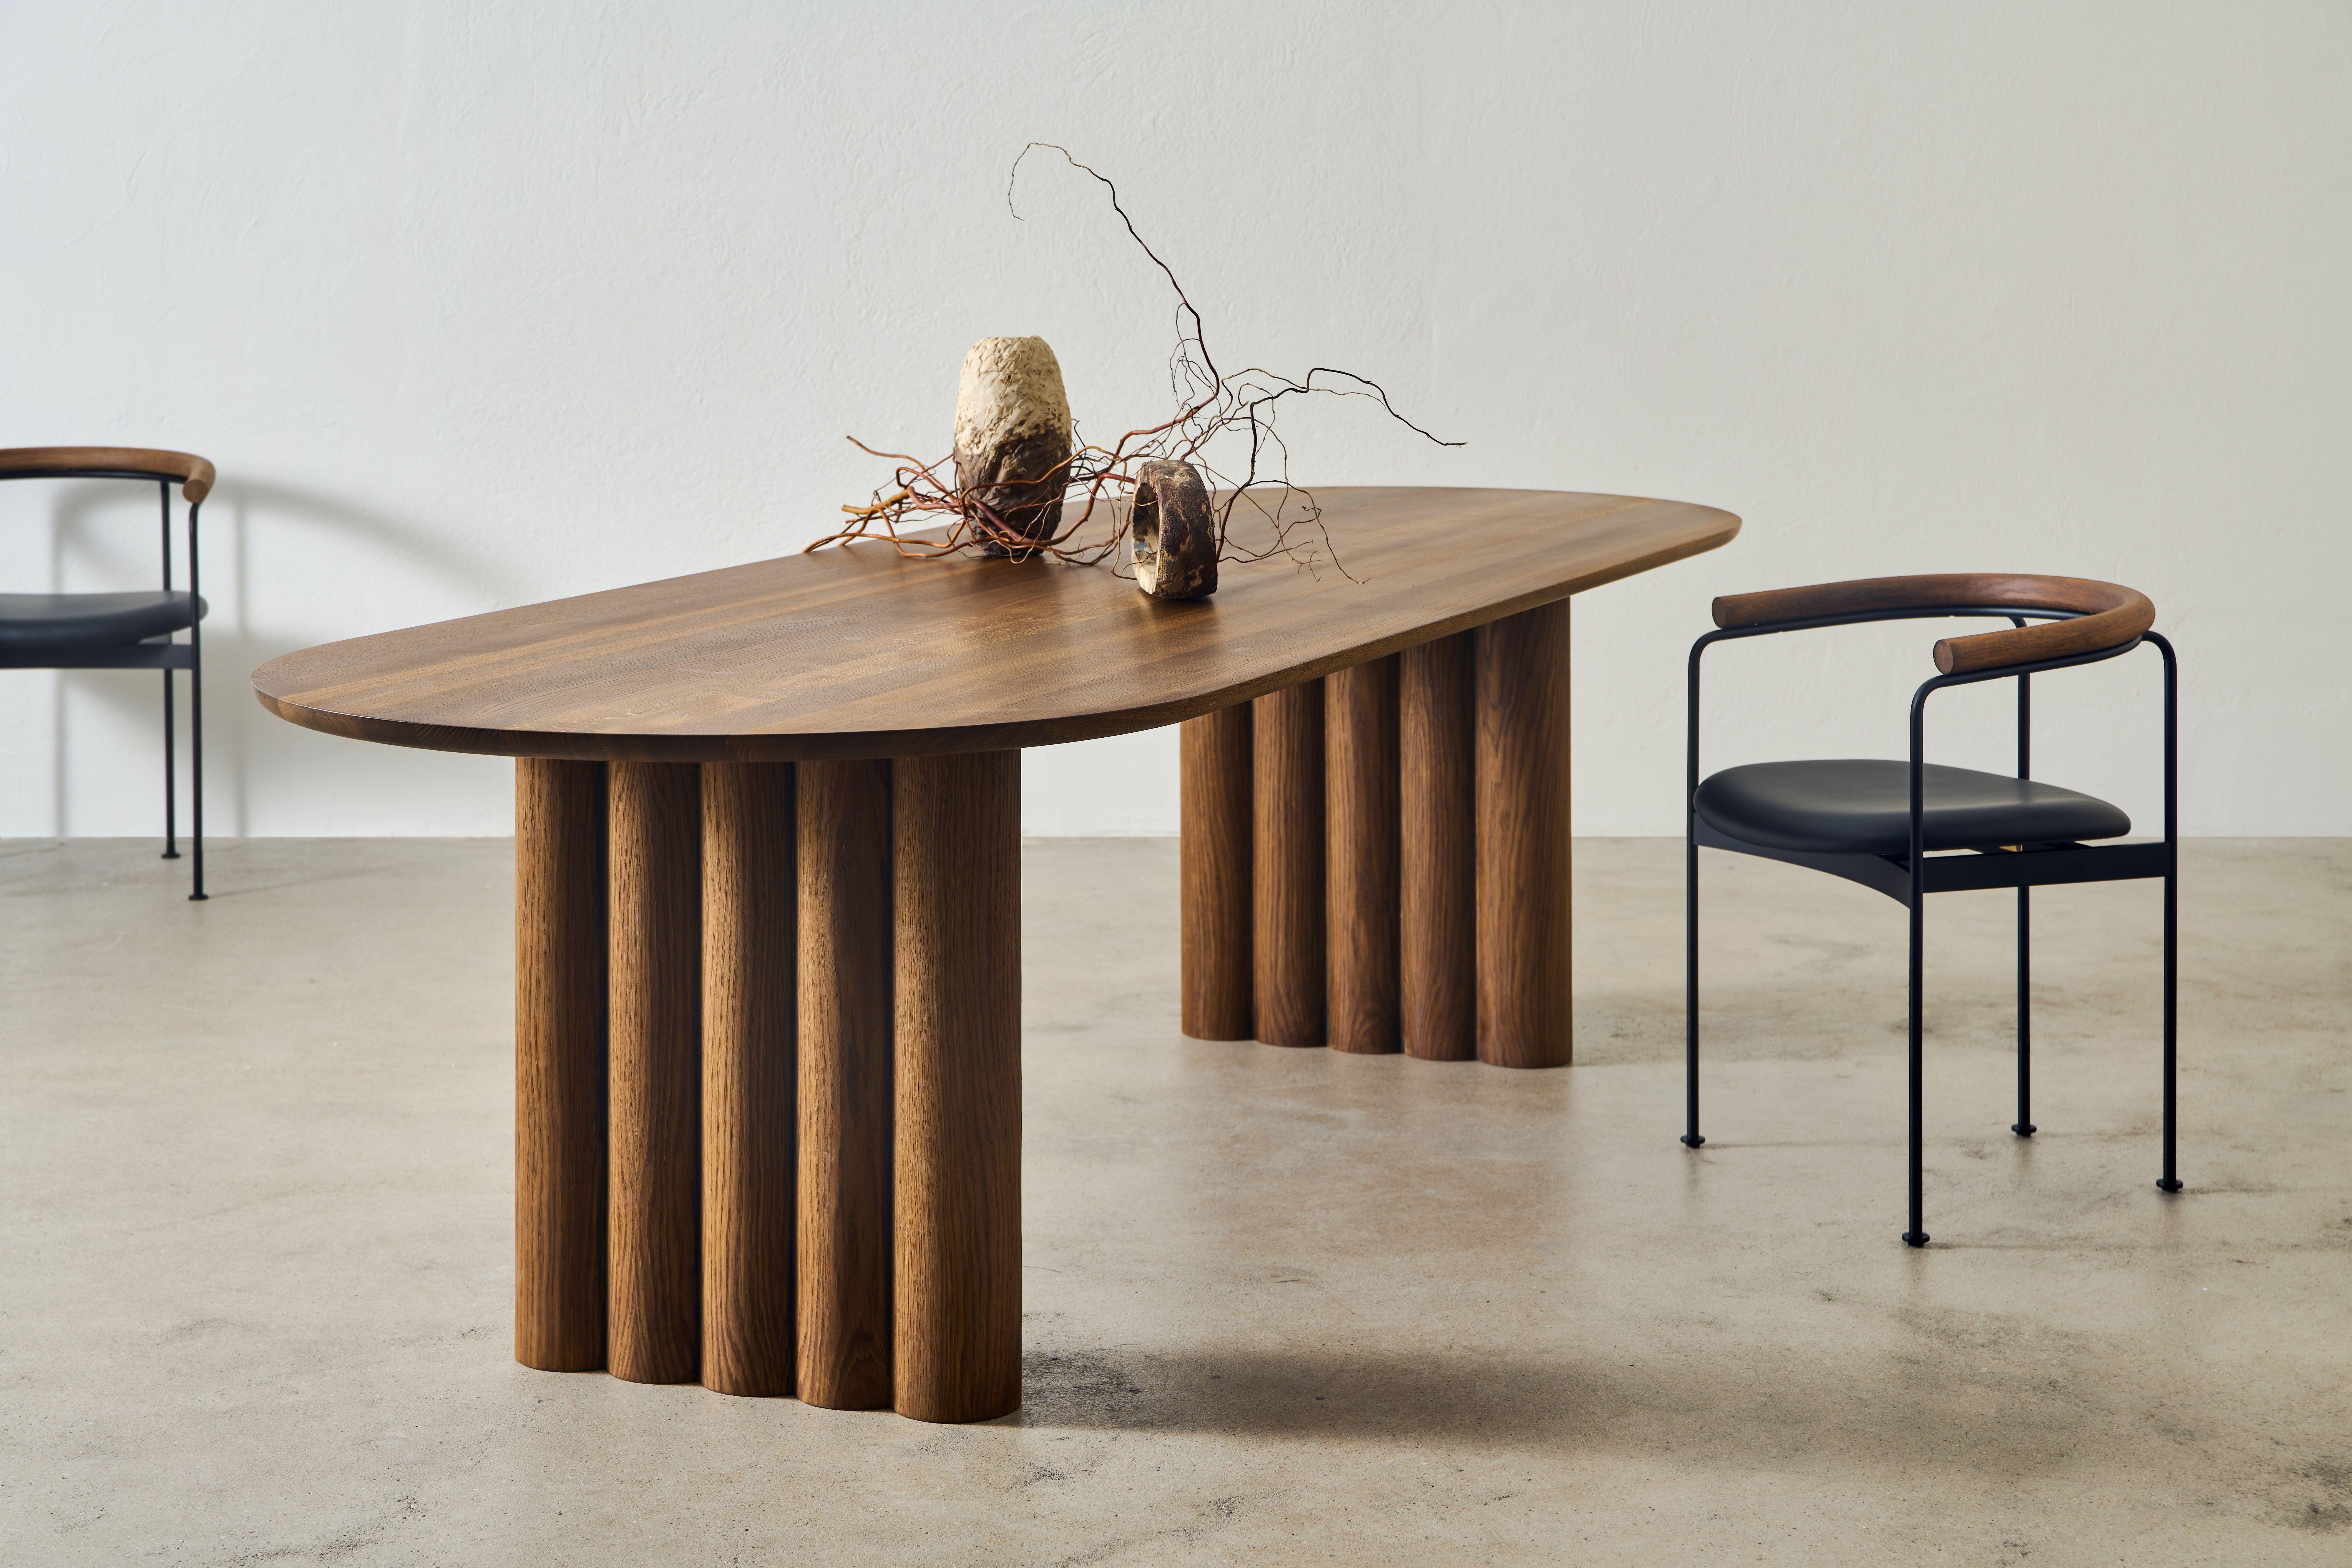 Danish Contemporary Dining Table 'Plush' by Dk3, Smoked Oak or Walnut, 300, Rectangular For Sale